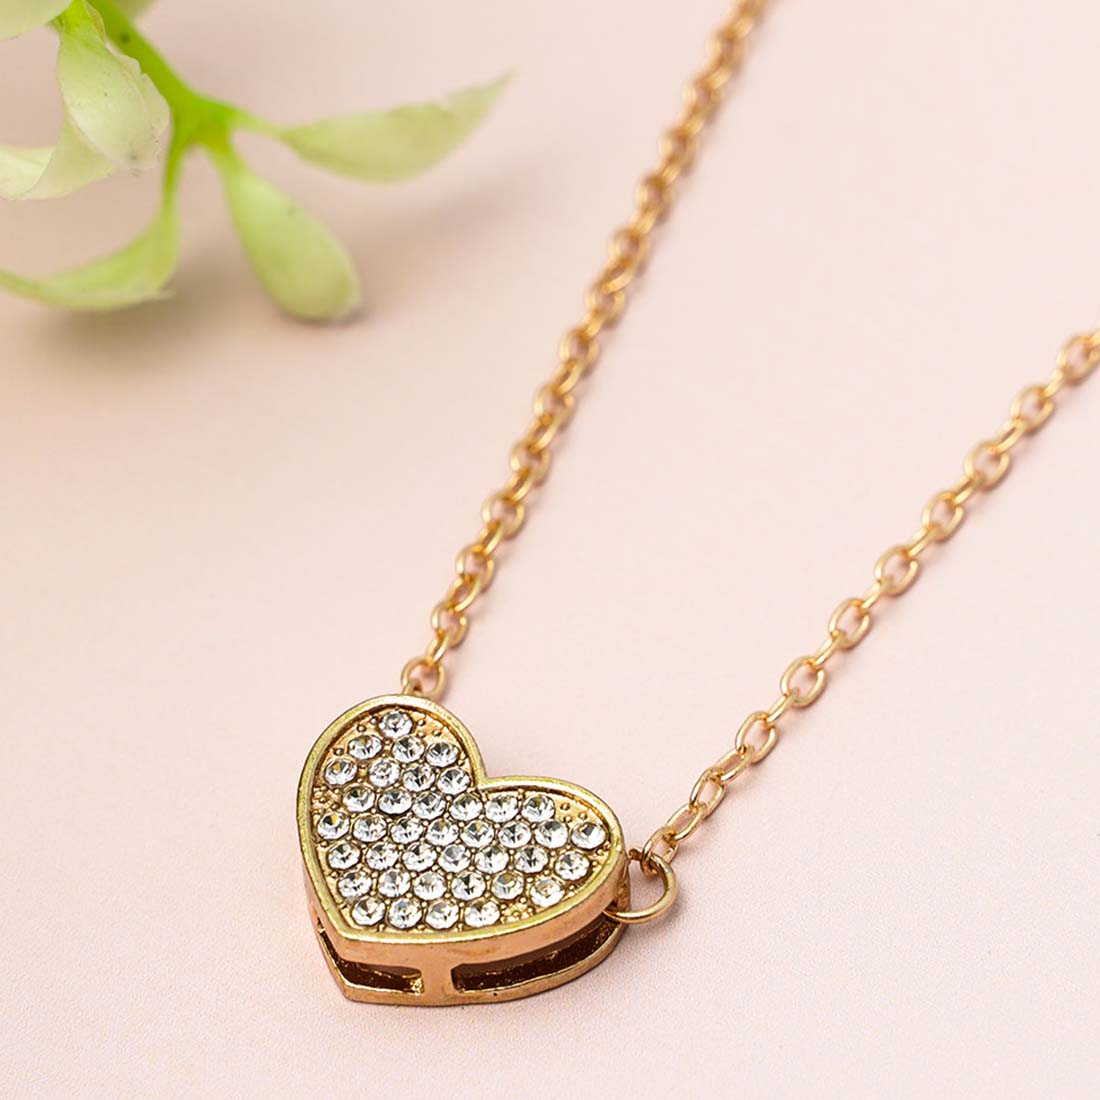 Gold-Toned Stone Studded Heart Pendant With Chain